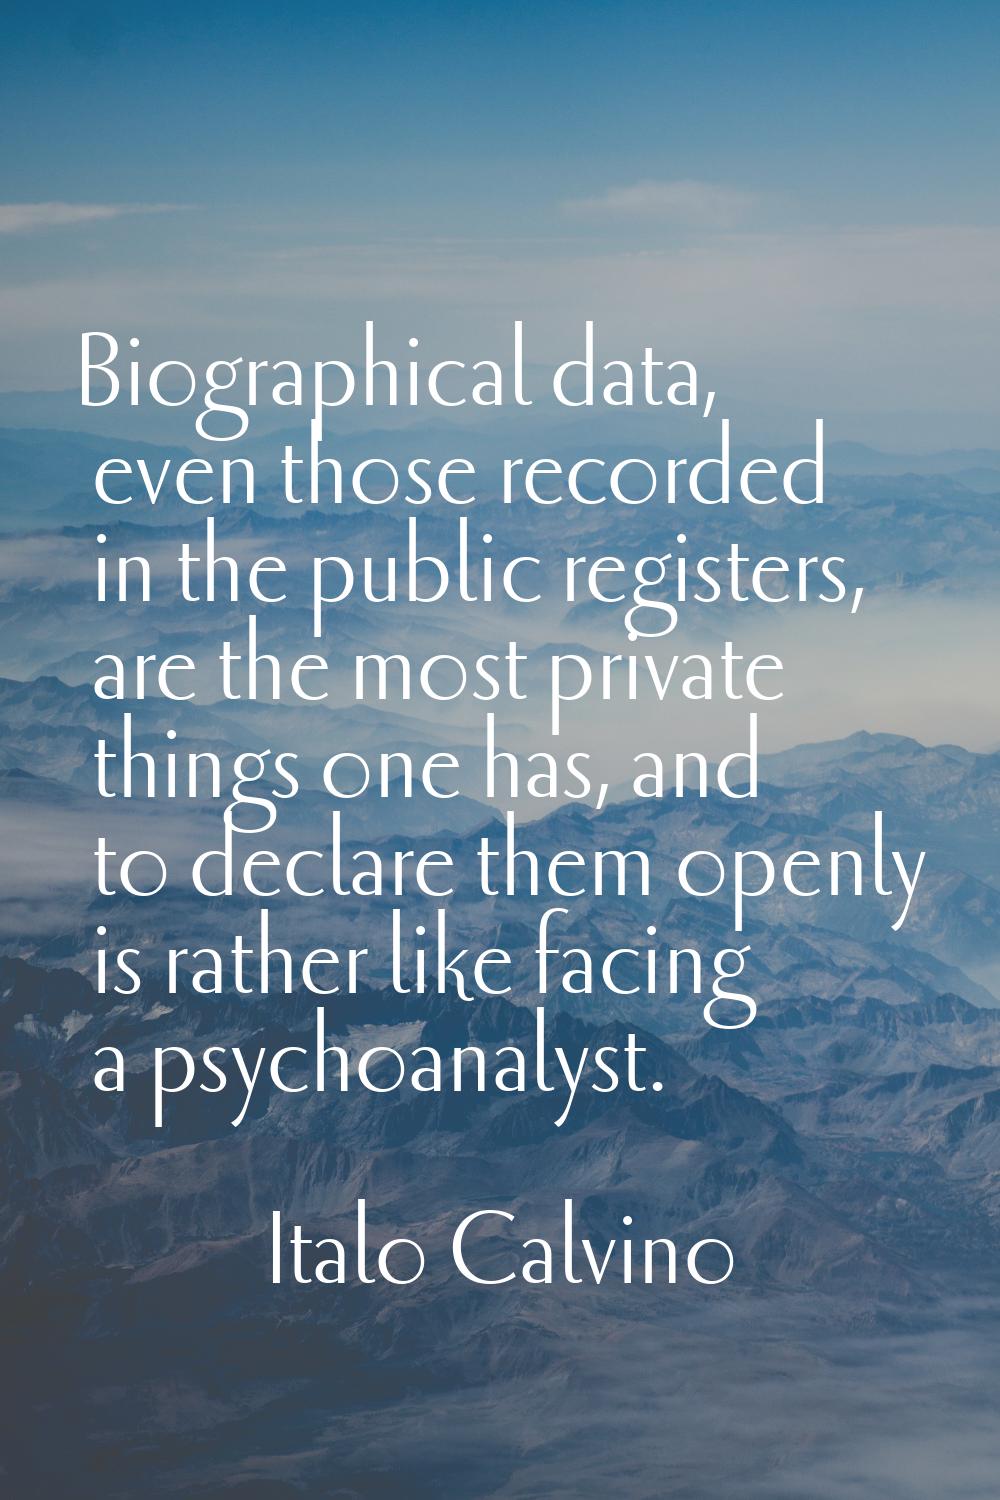 Biographical data, even those recorded in the public registers, are the most private things one has